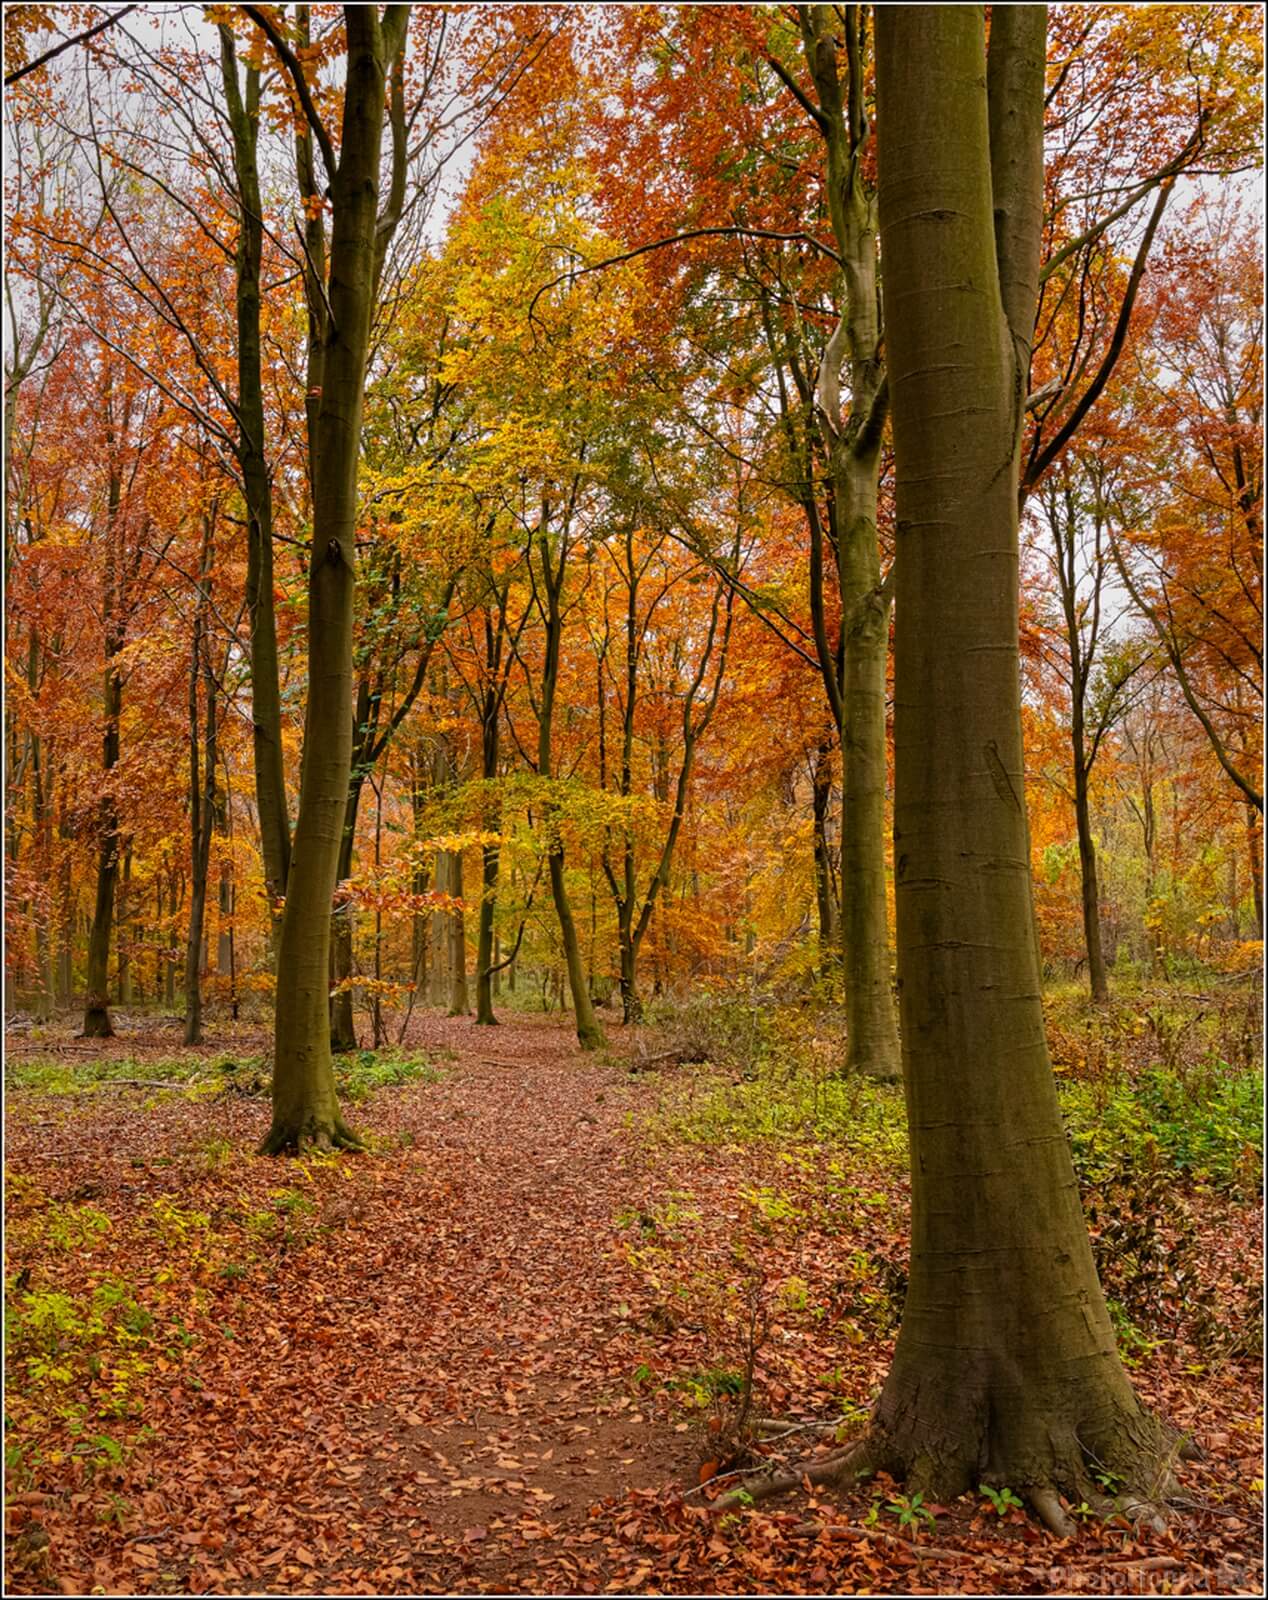 Image of Bedford Purlieus Woods by Malcolm Hupman